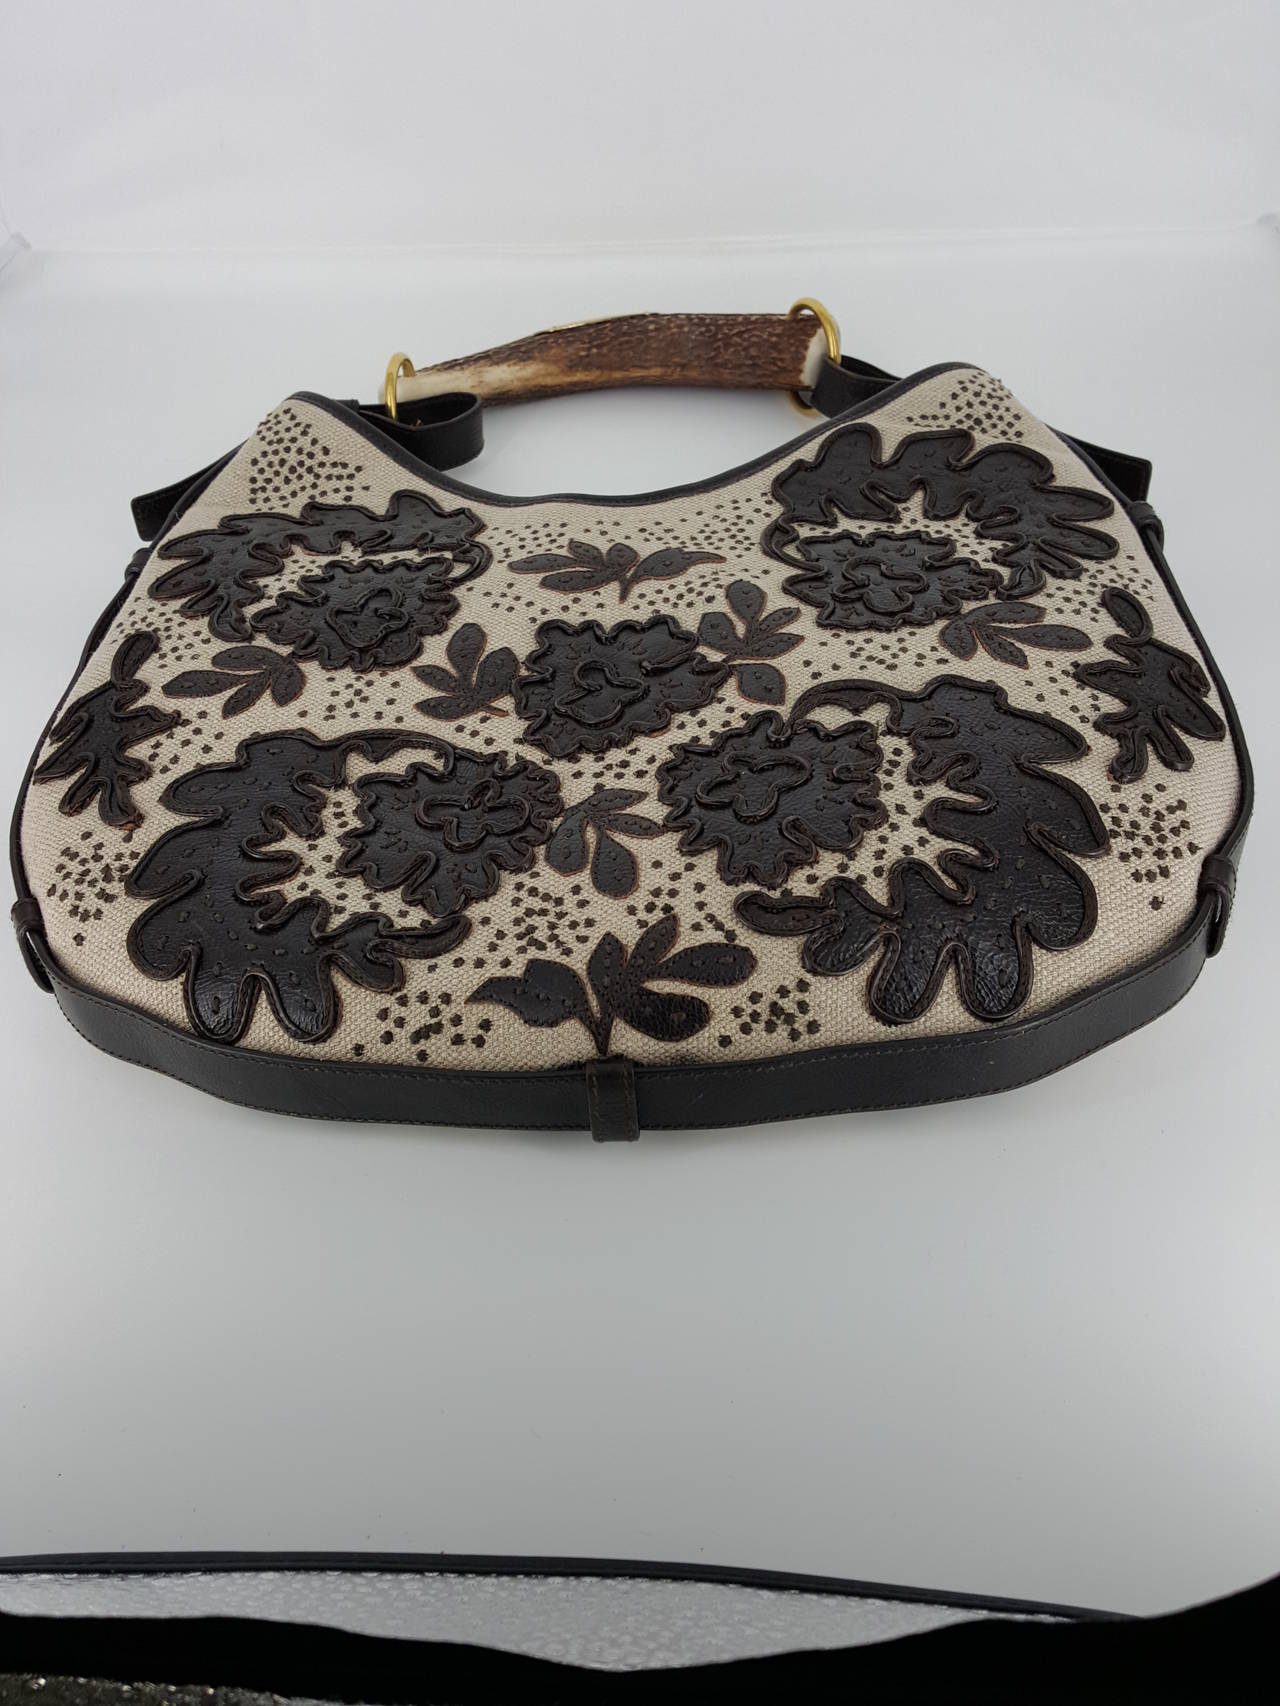 This is a unique edition of YSL's Rive Gauche Mambasa Bags.  This Fabric bag with leather leaves and horn handle is available for sale.  This handbag was never used and in excellent condition.  The stunning horn handle makes a